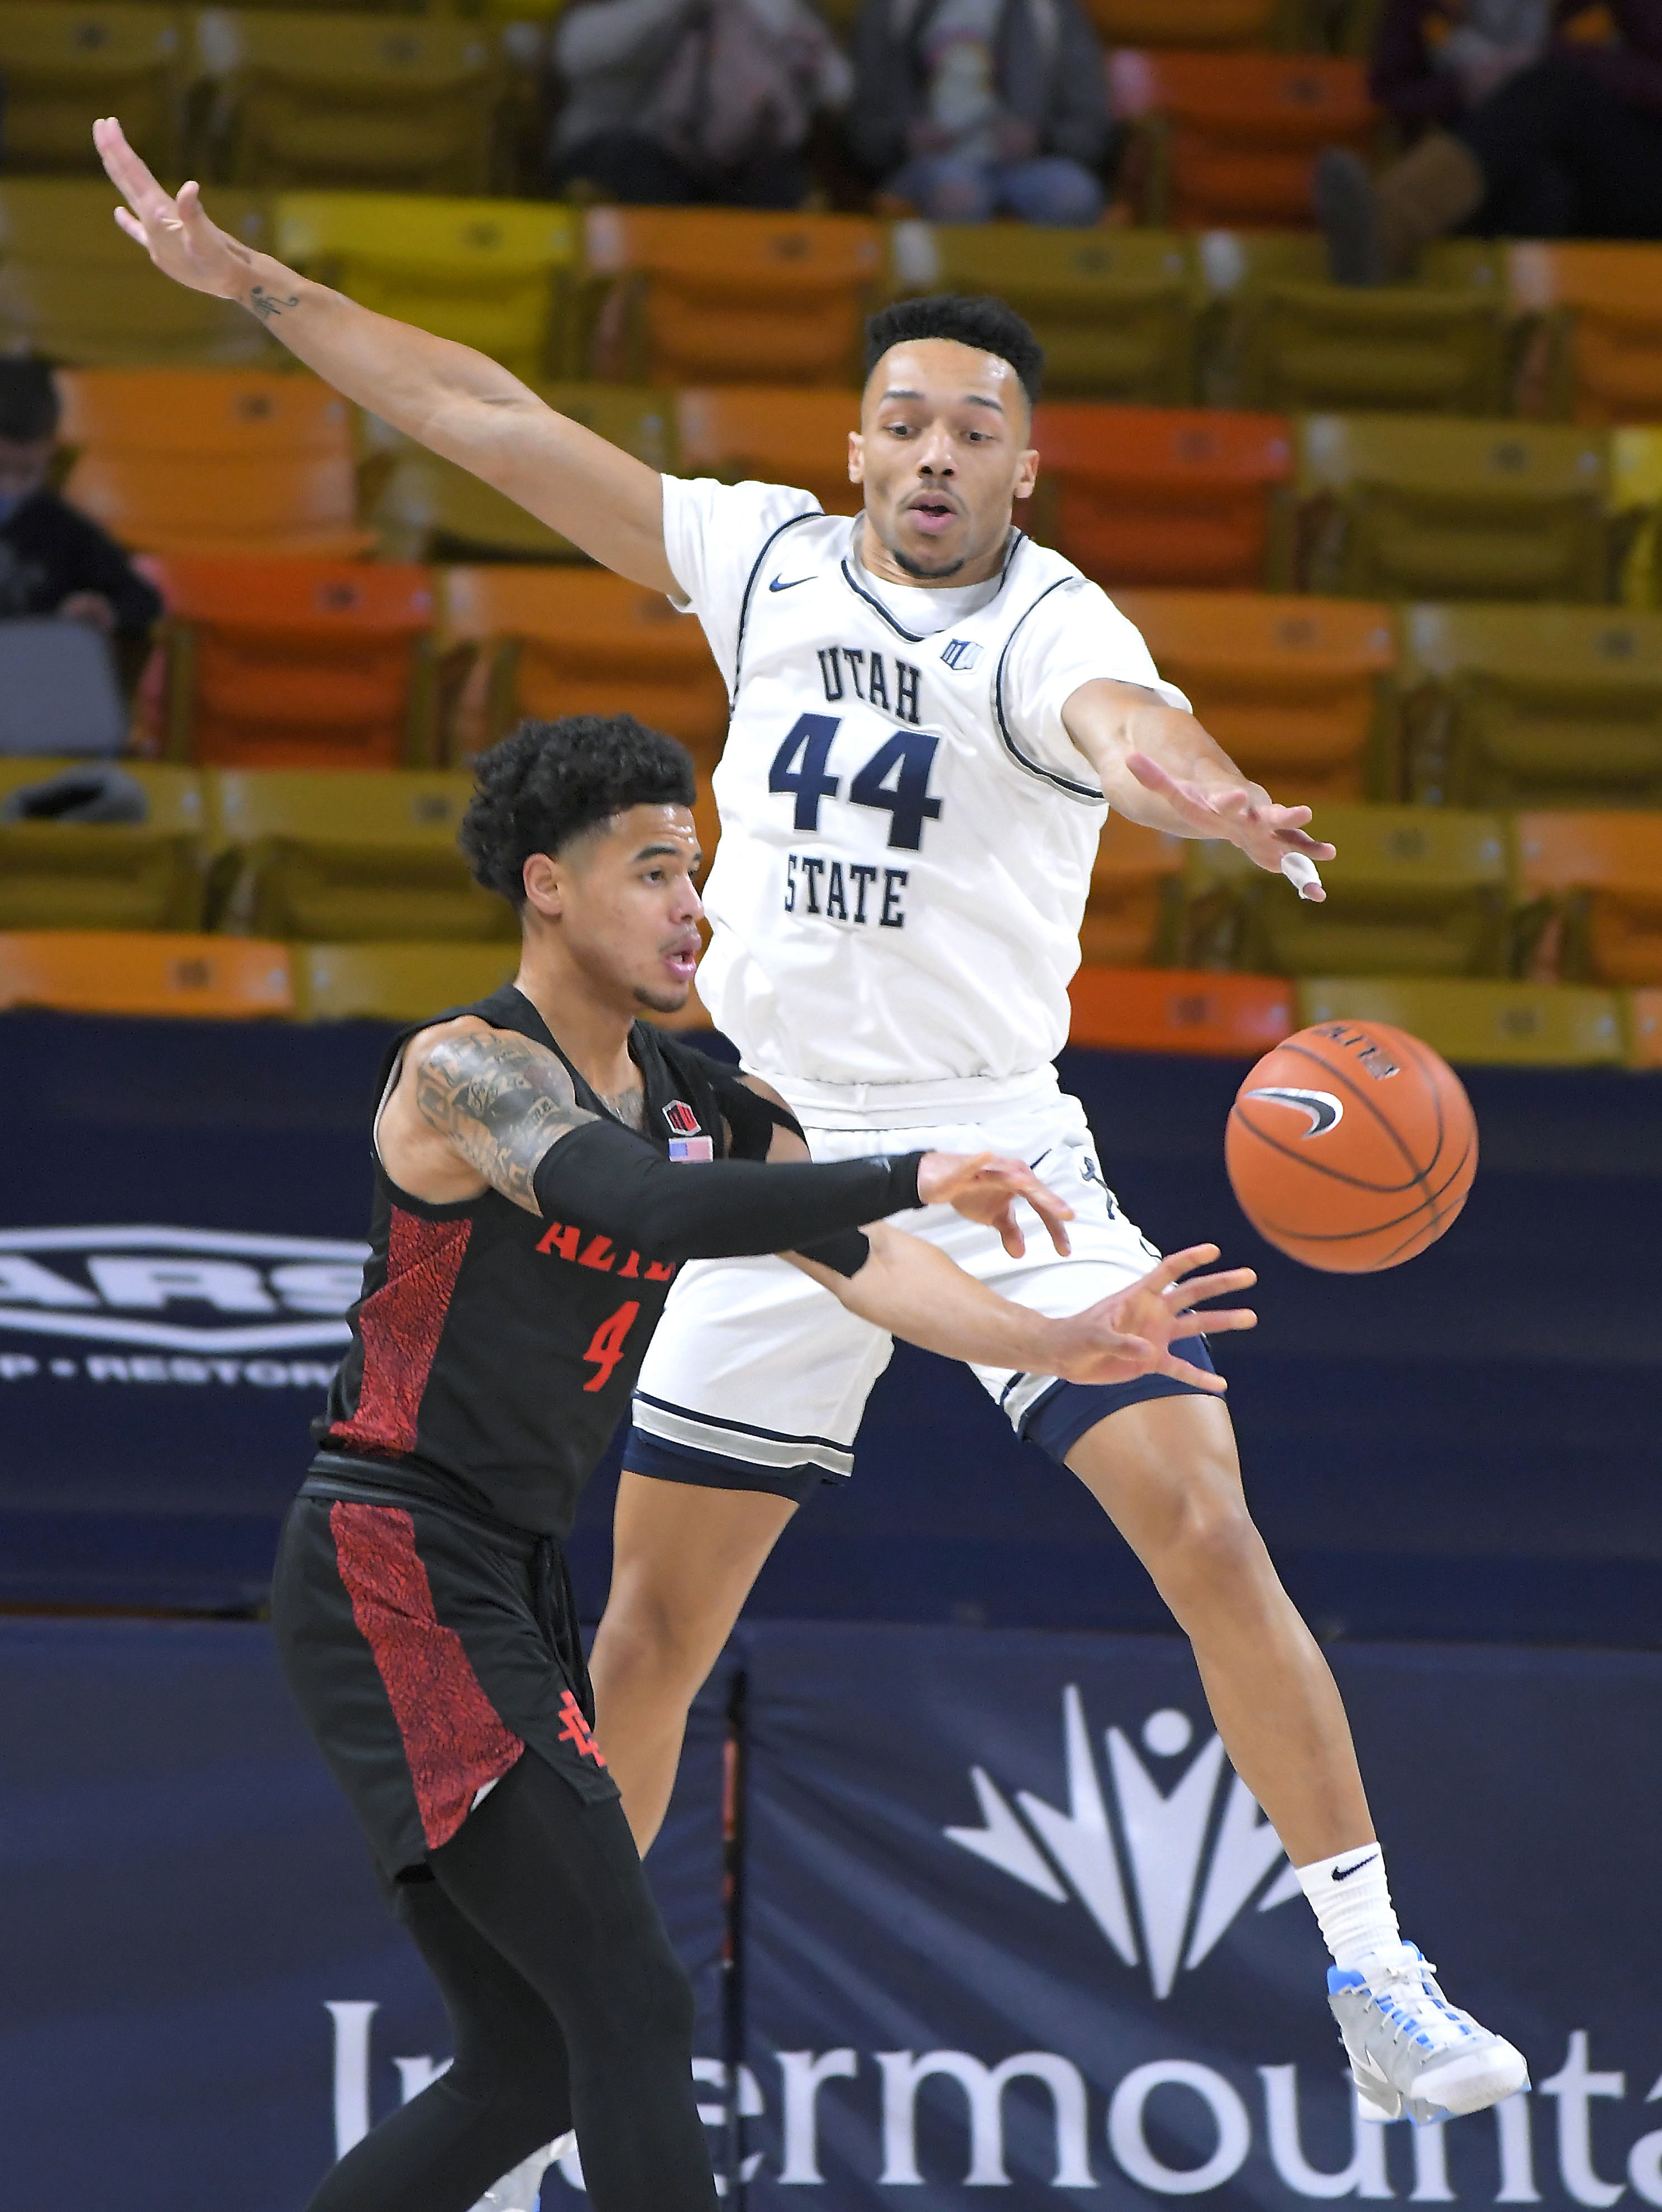 Utah State wing Marco Anthony following Craig Smith, transferring